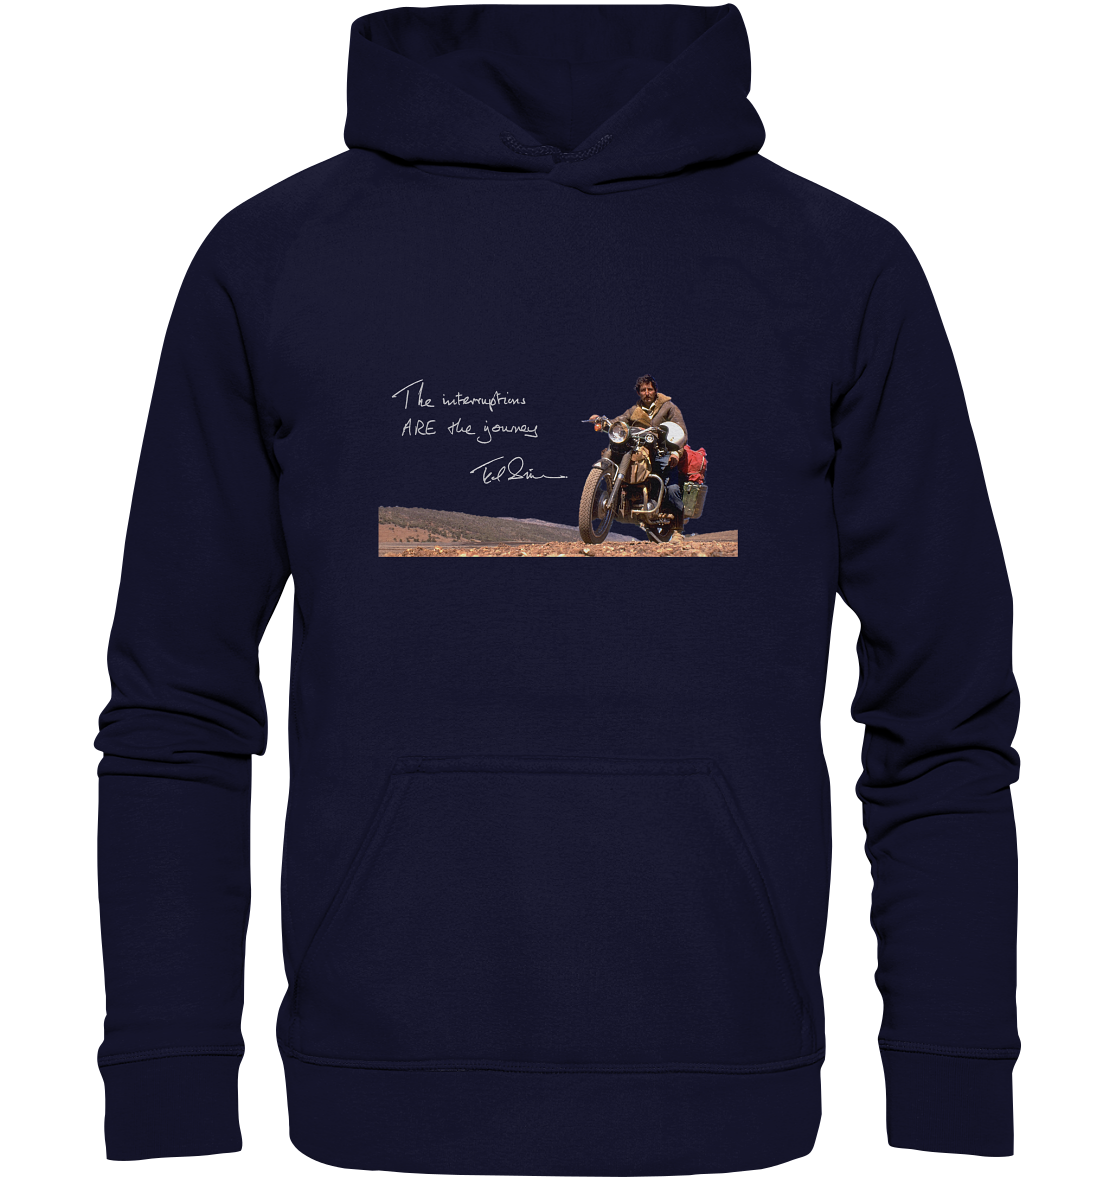 Hoodie "Ted Simon - The Interruptions are the journey." dunkel blau